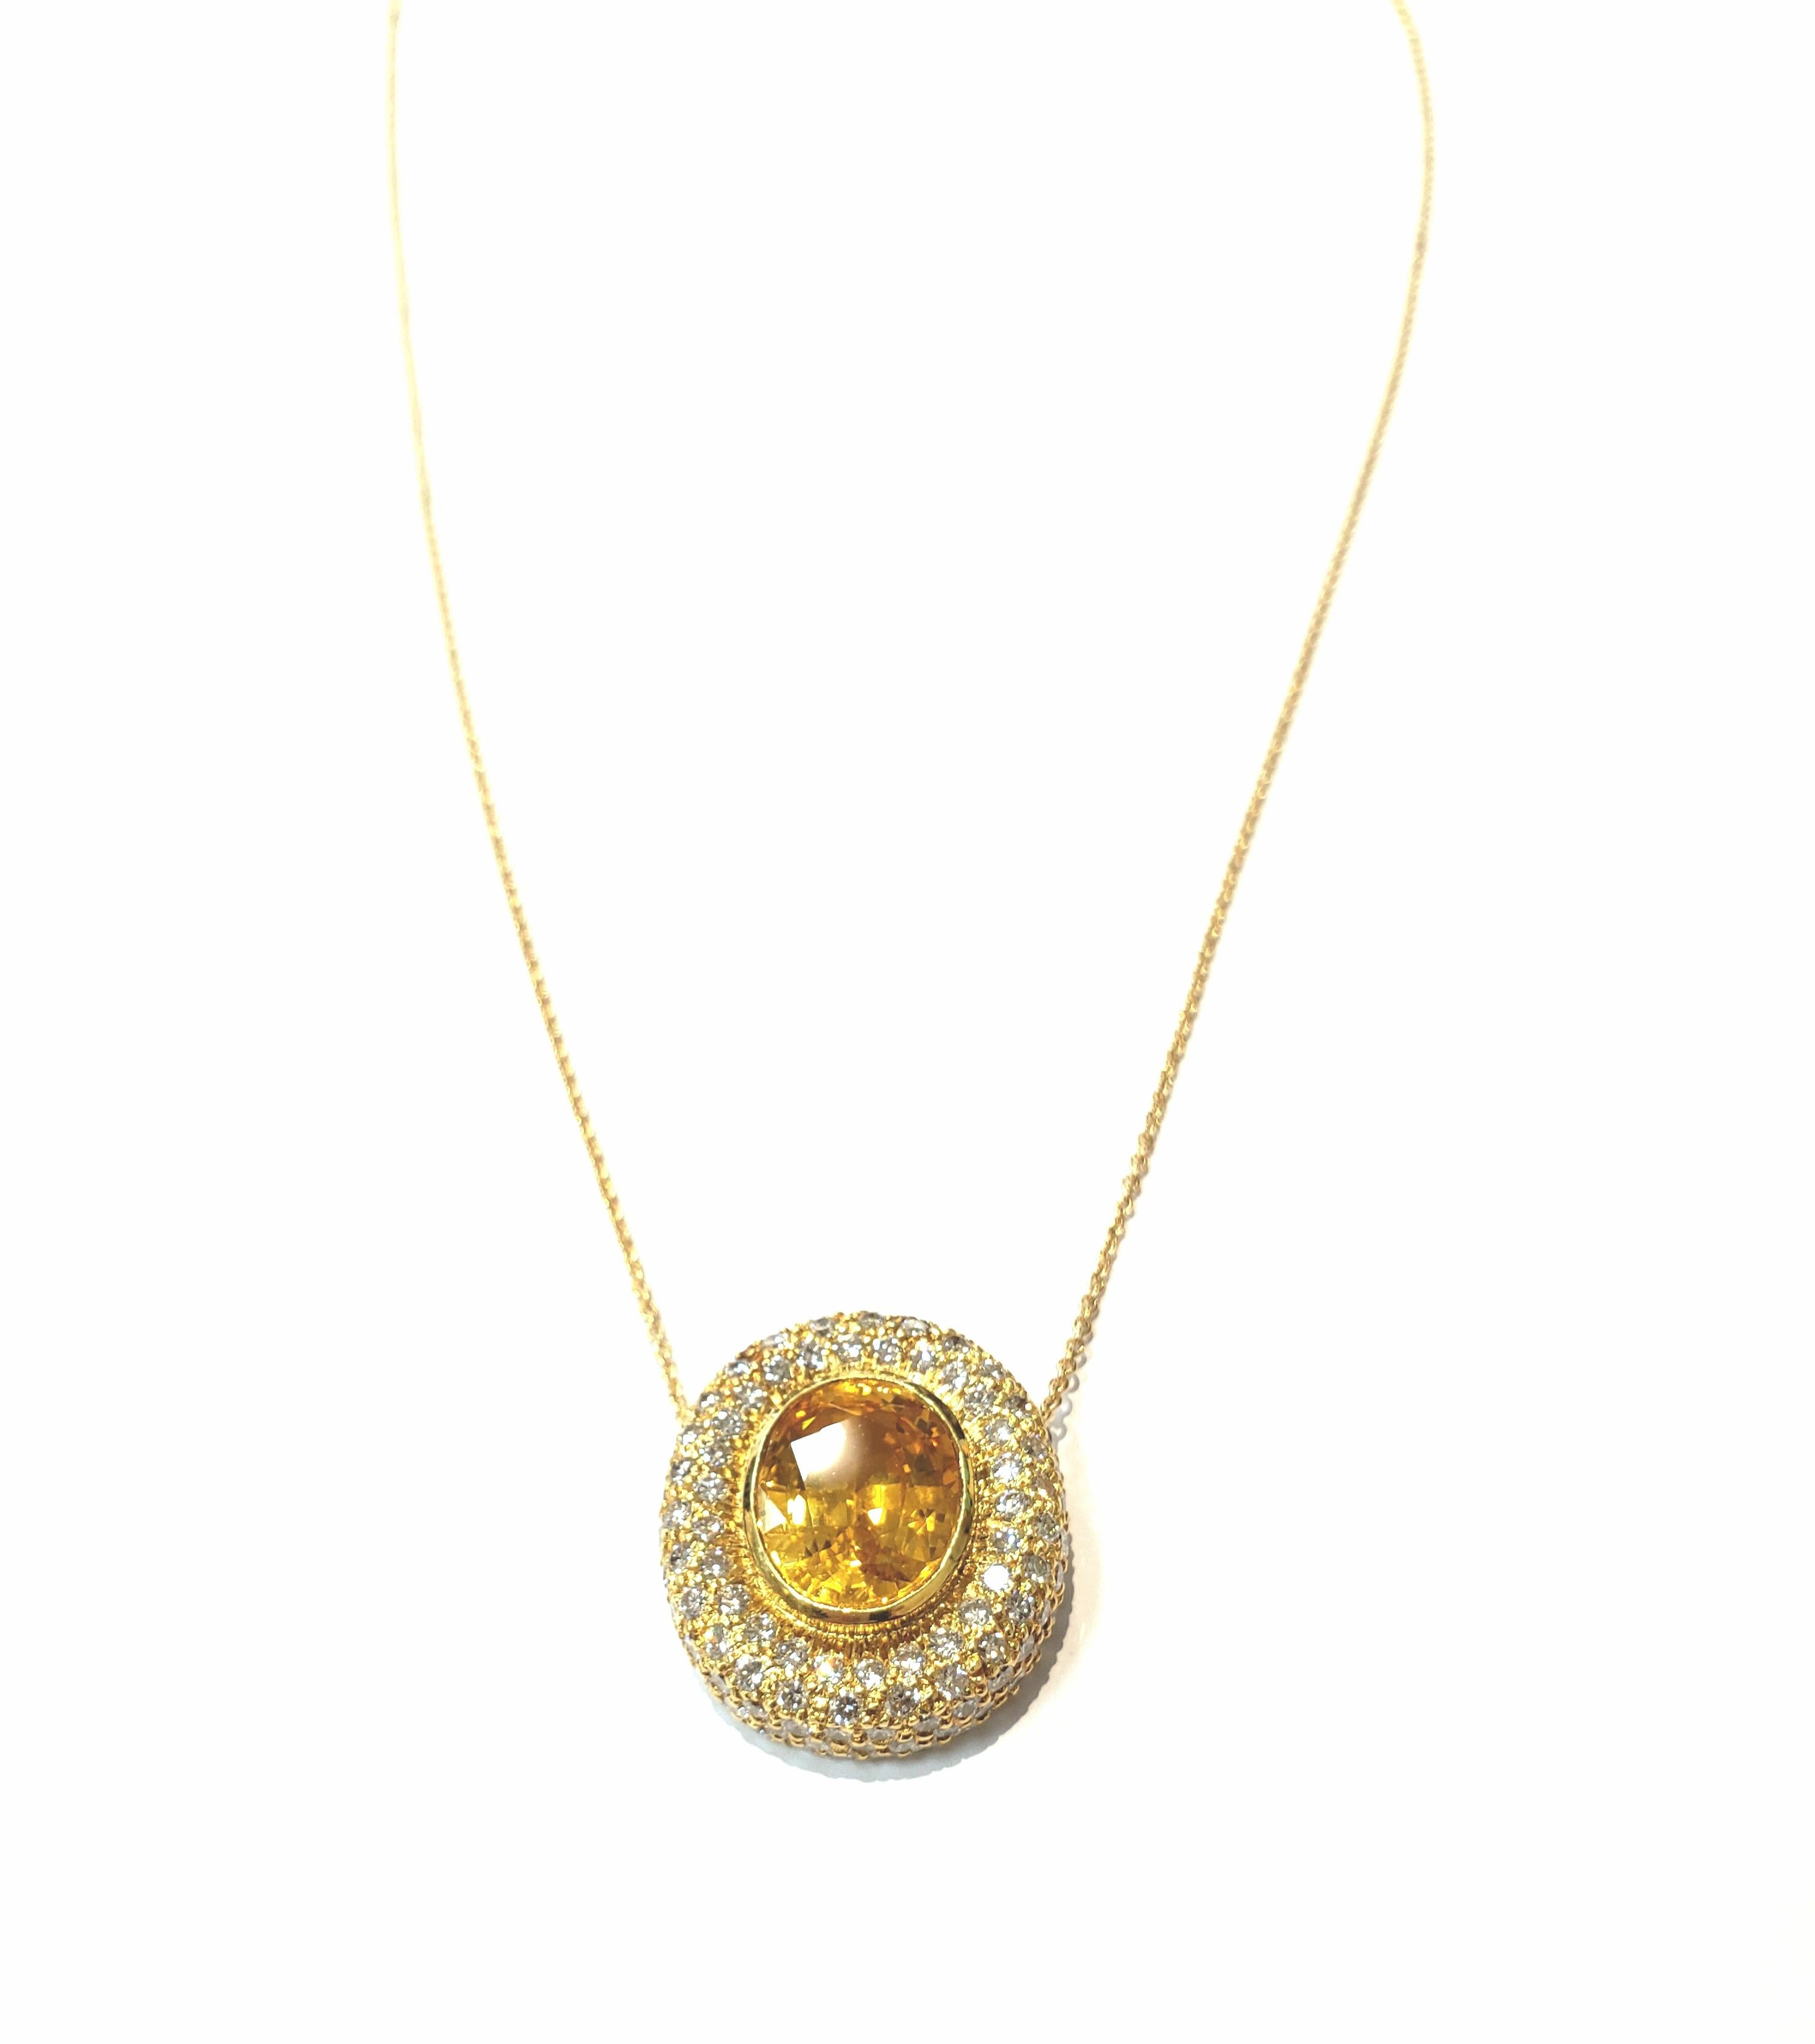 A vivid oval faceted yellow sapphire, bezel set in the center of a handmade 18 karat yellow gold pendant, with
full cut pave set diamonds. Pendant hangs from an 18 inch 1.5 mm yellow gold cable chain.
Oval yellow sapphire is 5.26 carats. It is a